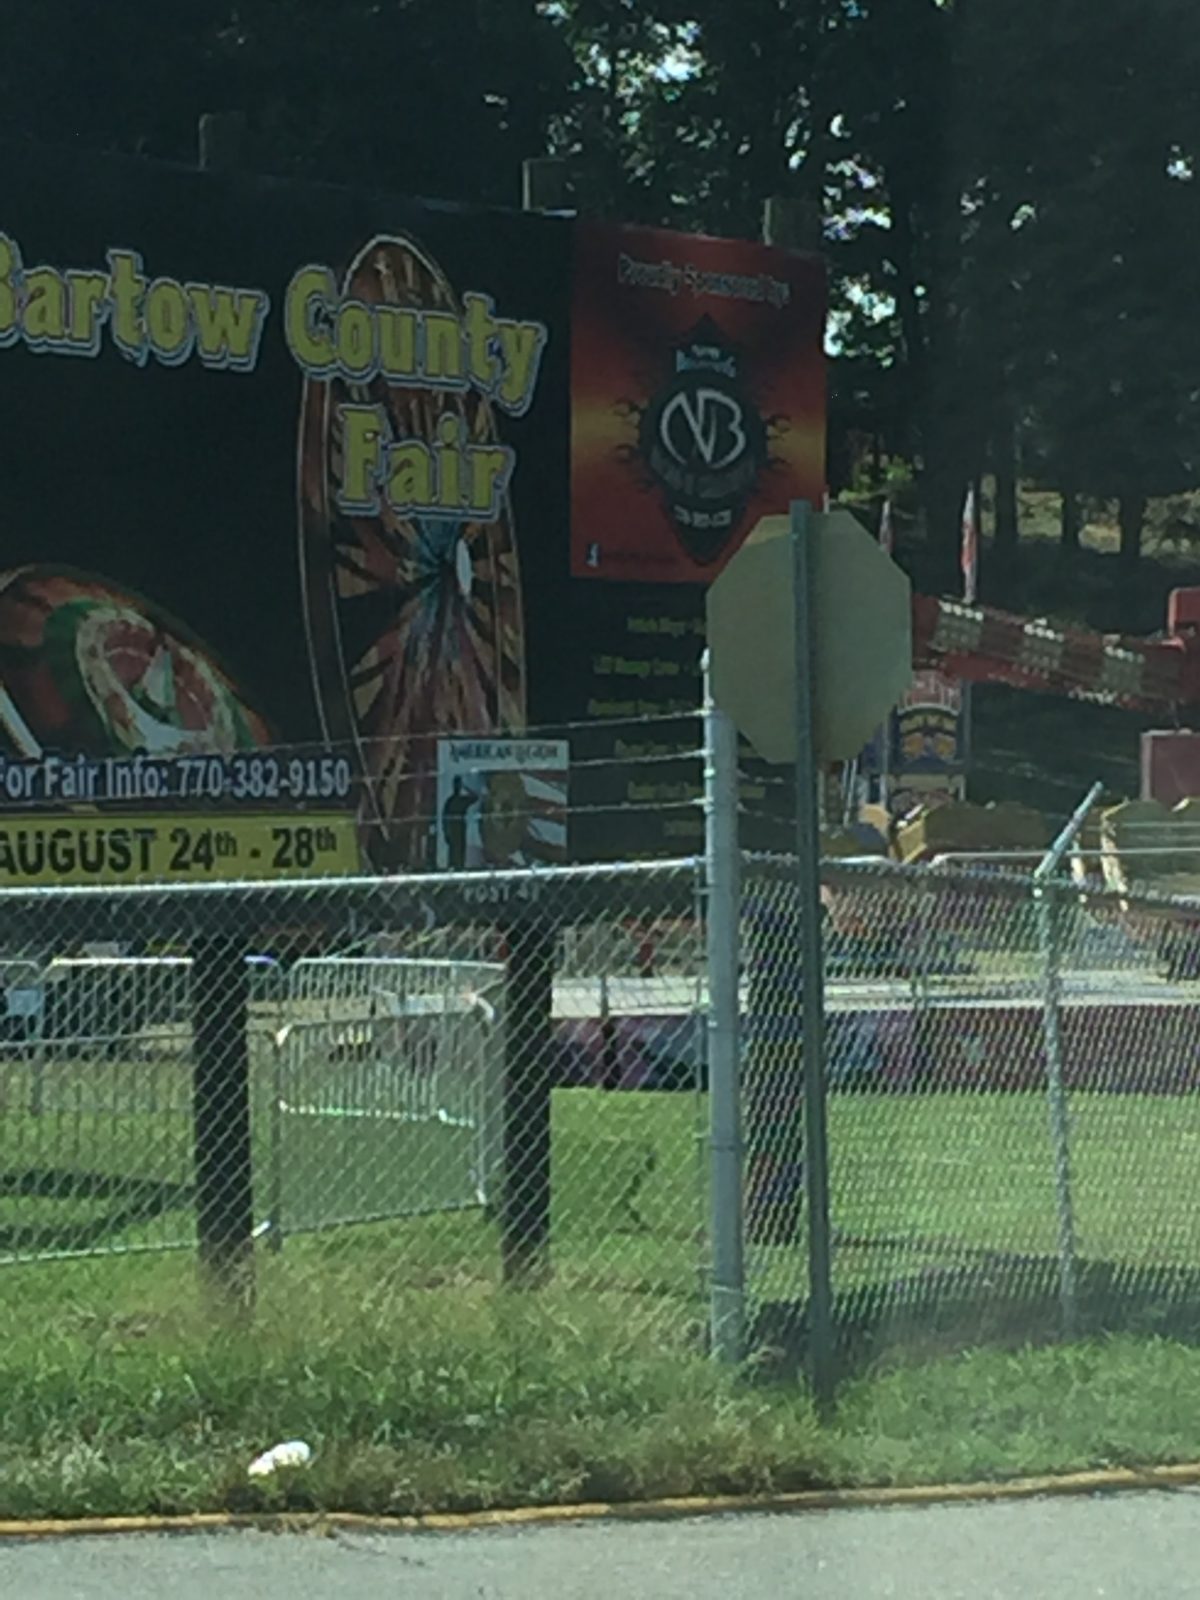 State Officials reopen Bartow County Fair WBHF